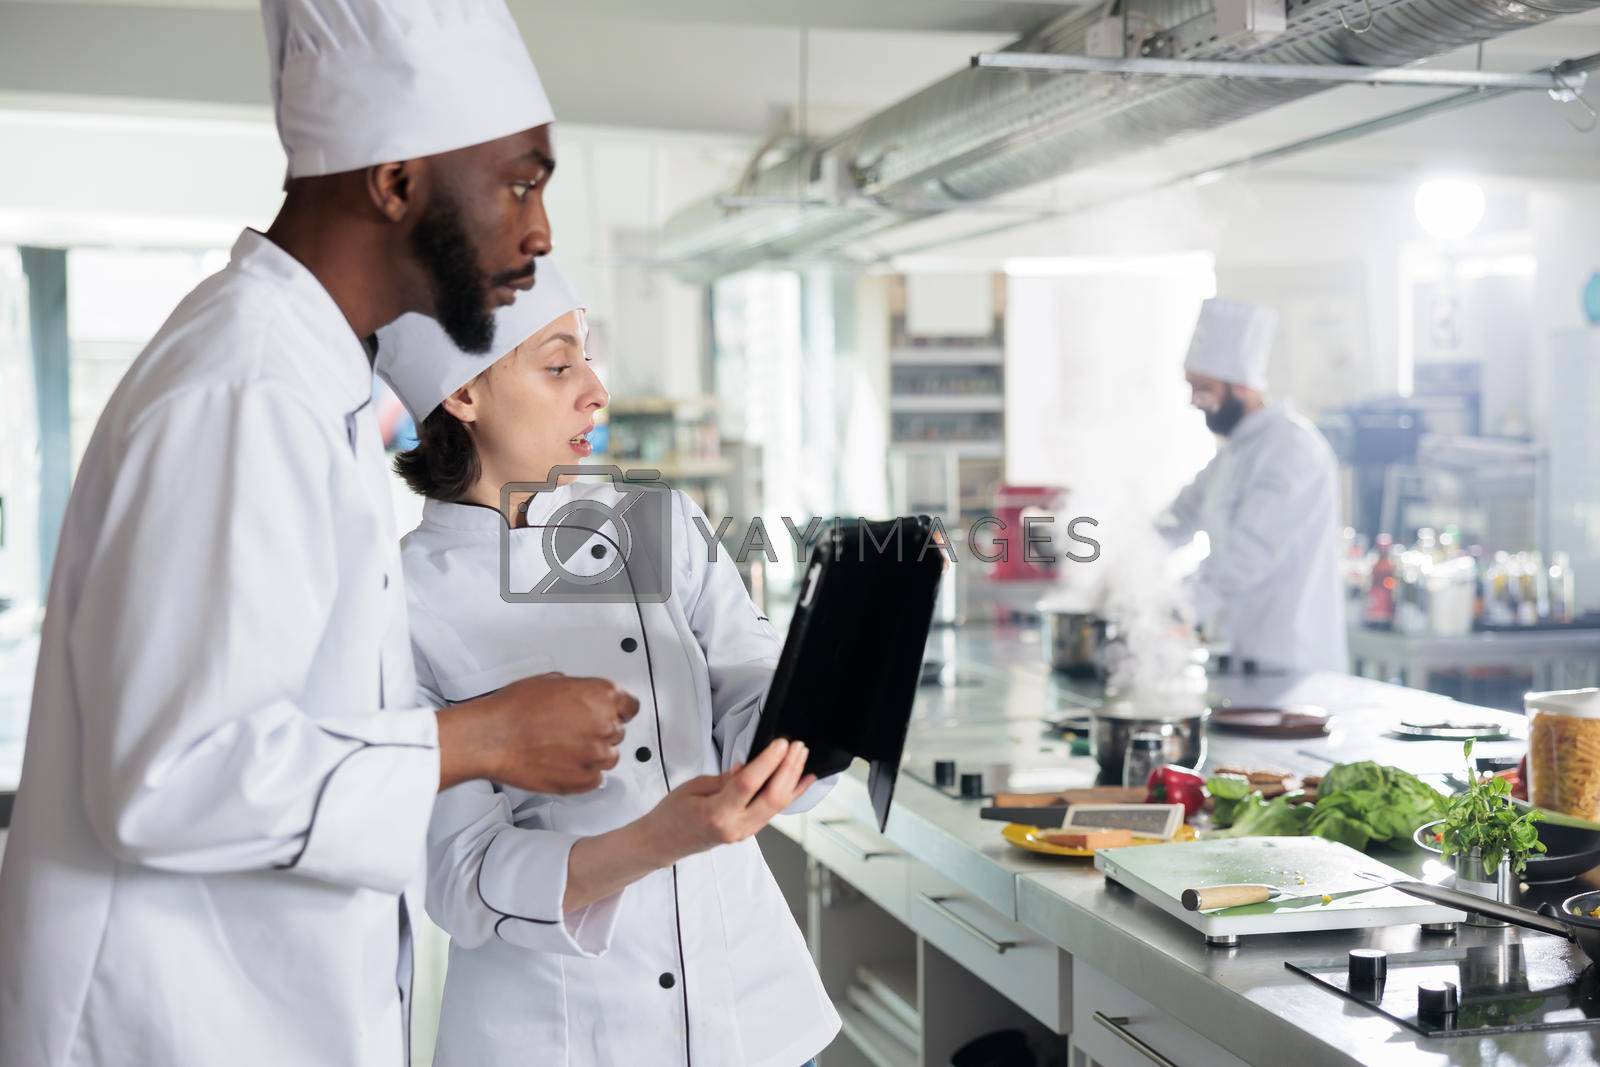 Gourmet cuisine experts with modern tablet searching for dinner service dish ideas on internet. Professional chefs with handheld touchscreen device preparing ingredients for evening dinner service.